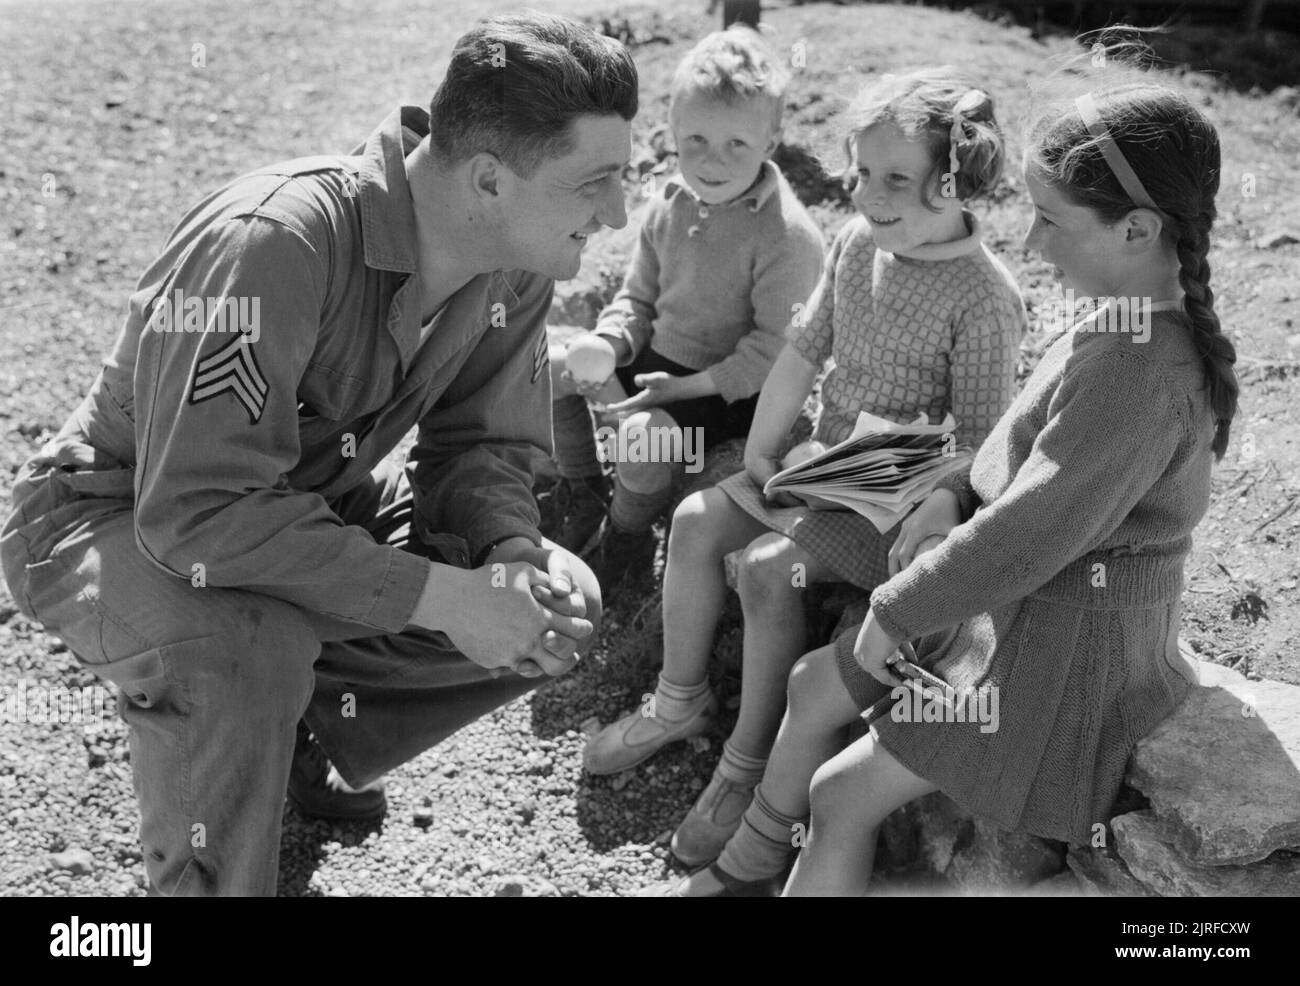 US Troops in An English Village- Everyday Life With the Americans in Burton Bradstock, Dorset, England, UK, 1944 Sergeant Foster Whitsitt (of Route 4, Box 915, Vancouver, Washington) smiles at three local children to whom he has just given oranges, in the sunshine in the village of Burton Bradstock, Dorset. The children include Chris Kerley and Betty 'Freckles' Mackay (right). Betty was given the nickname 'Freckles' by the Americans, as was a 'camp favourite'. Stock Photo